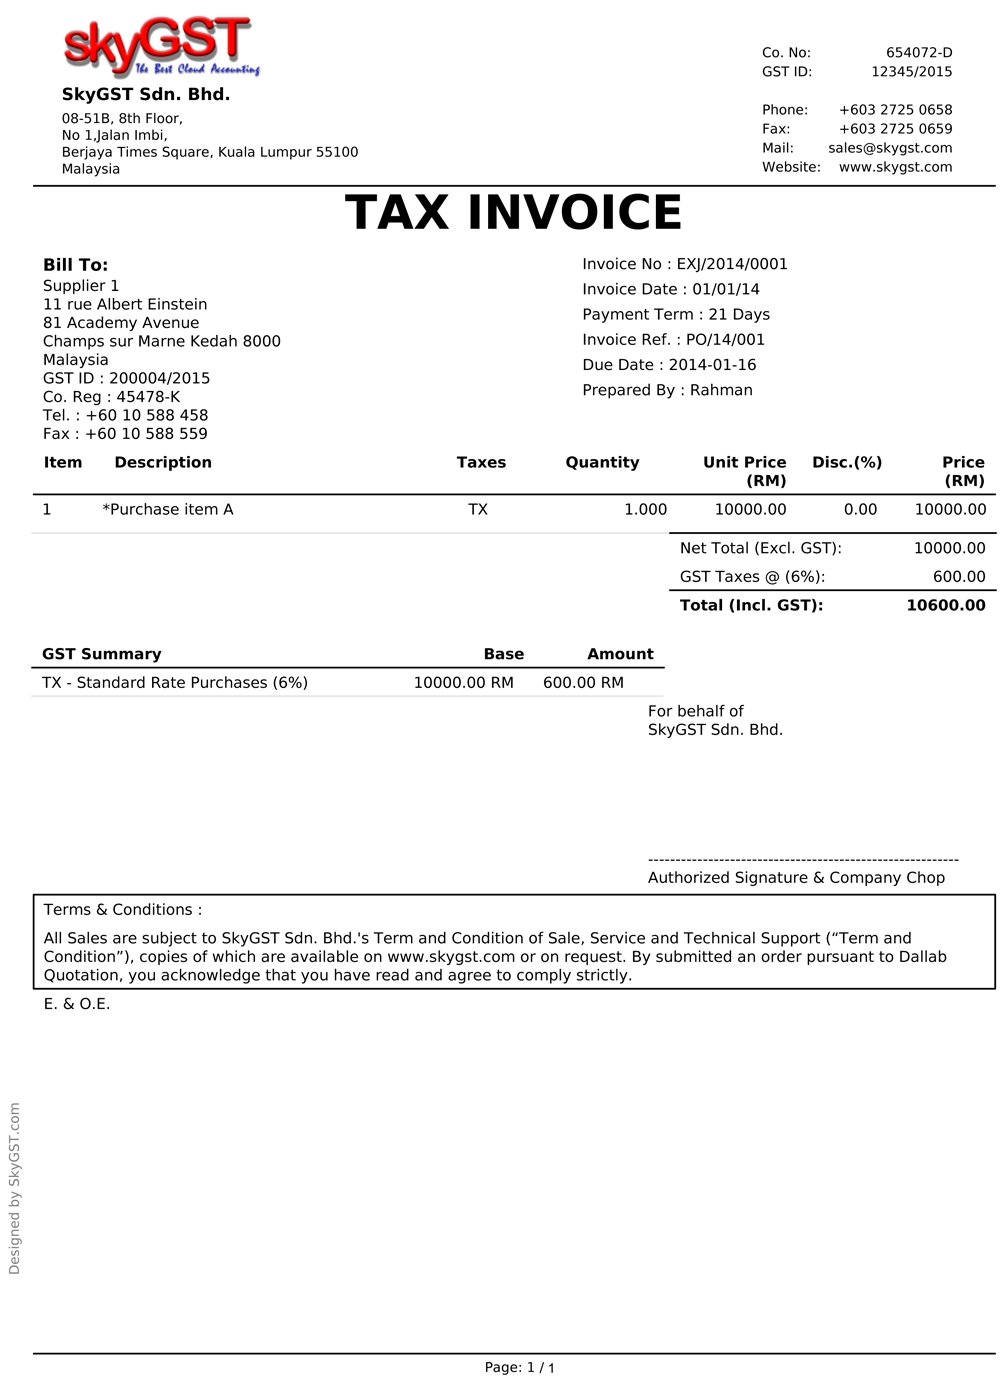 this tax invoice ok or not tax invoice number